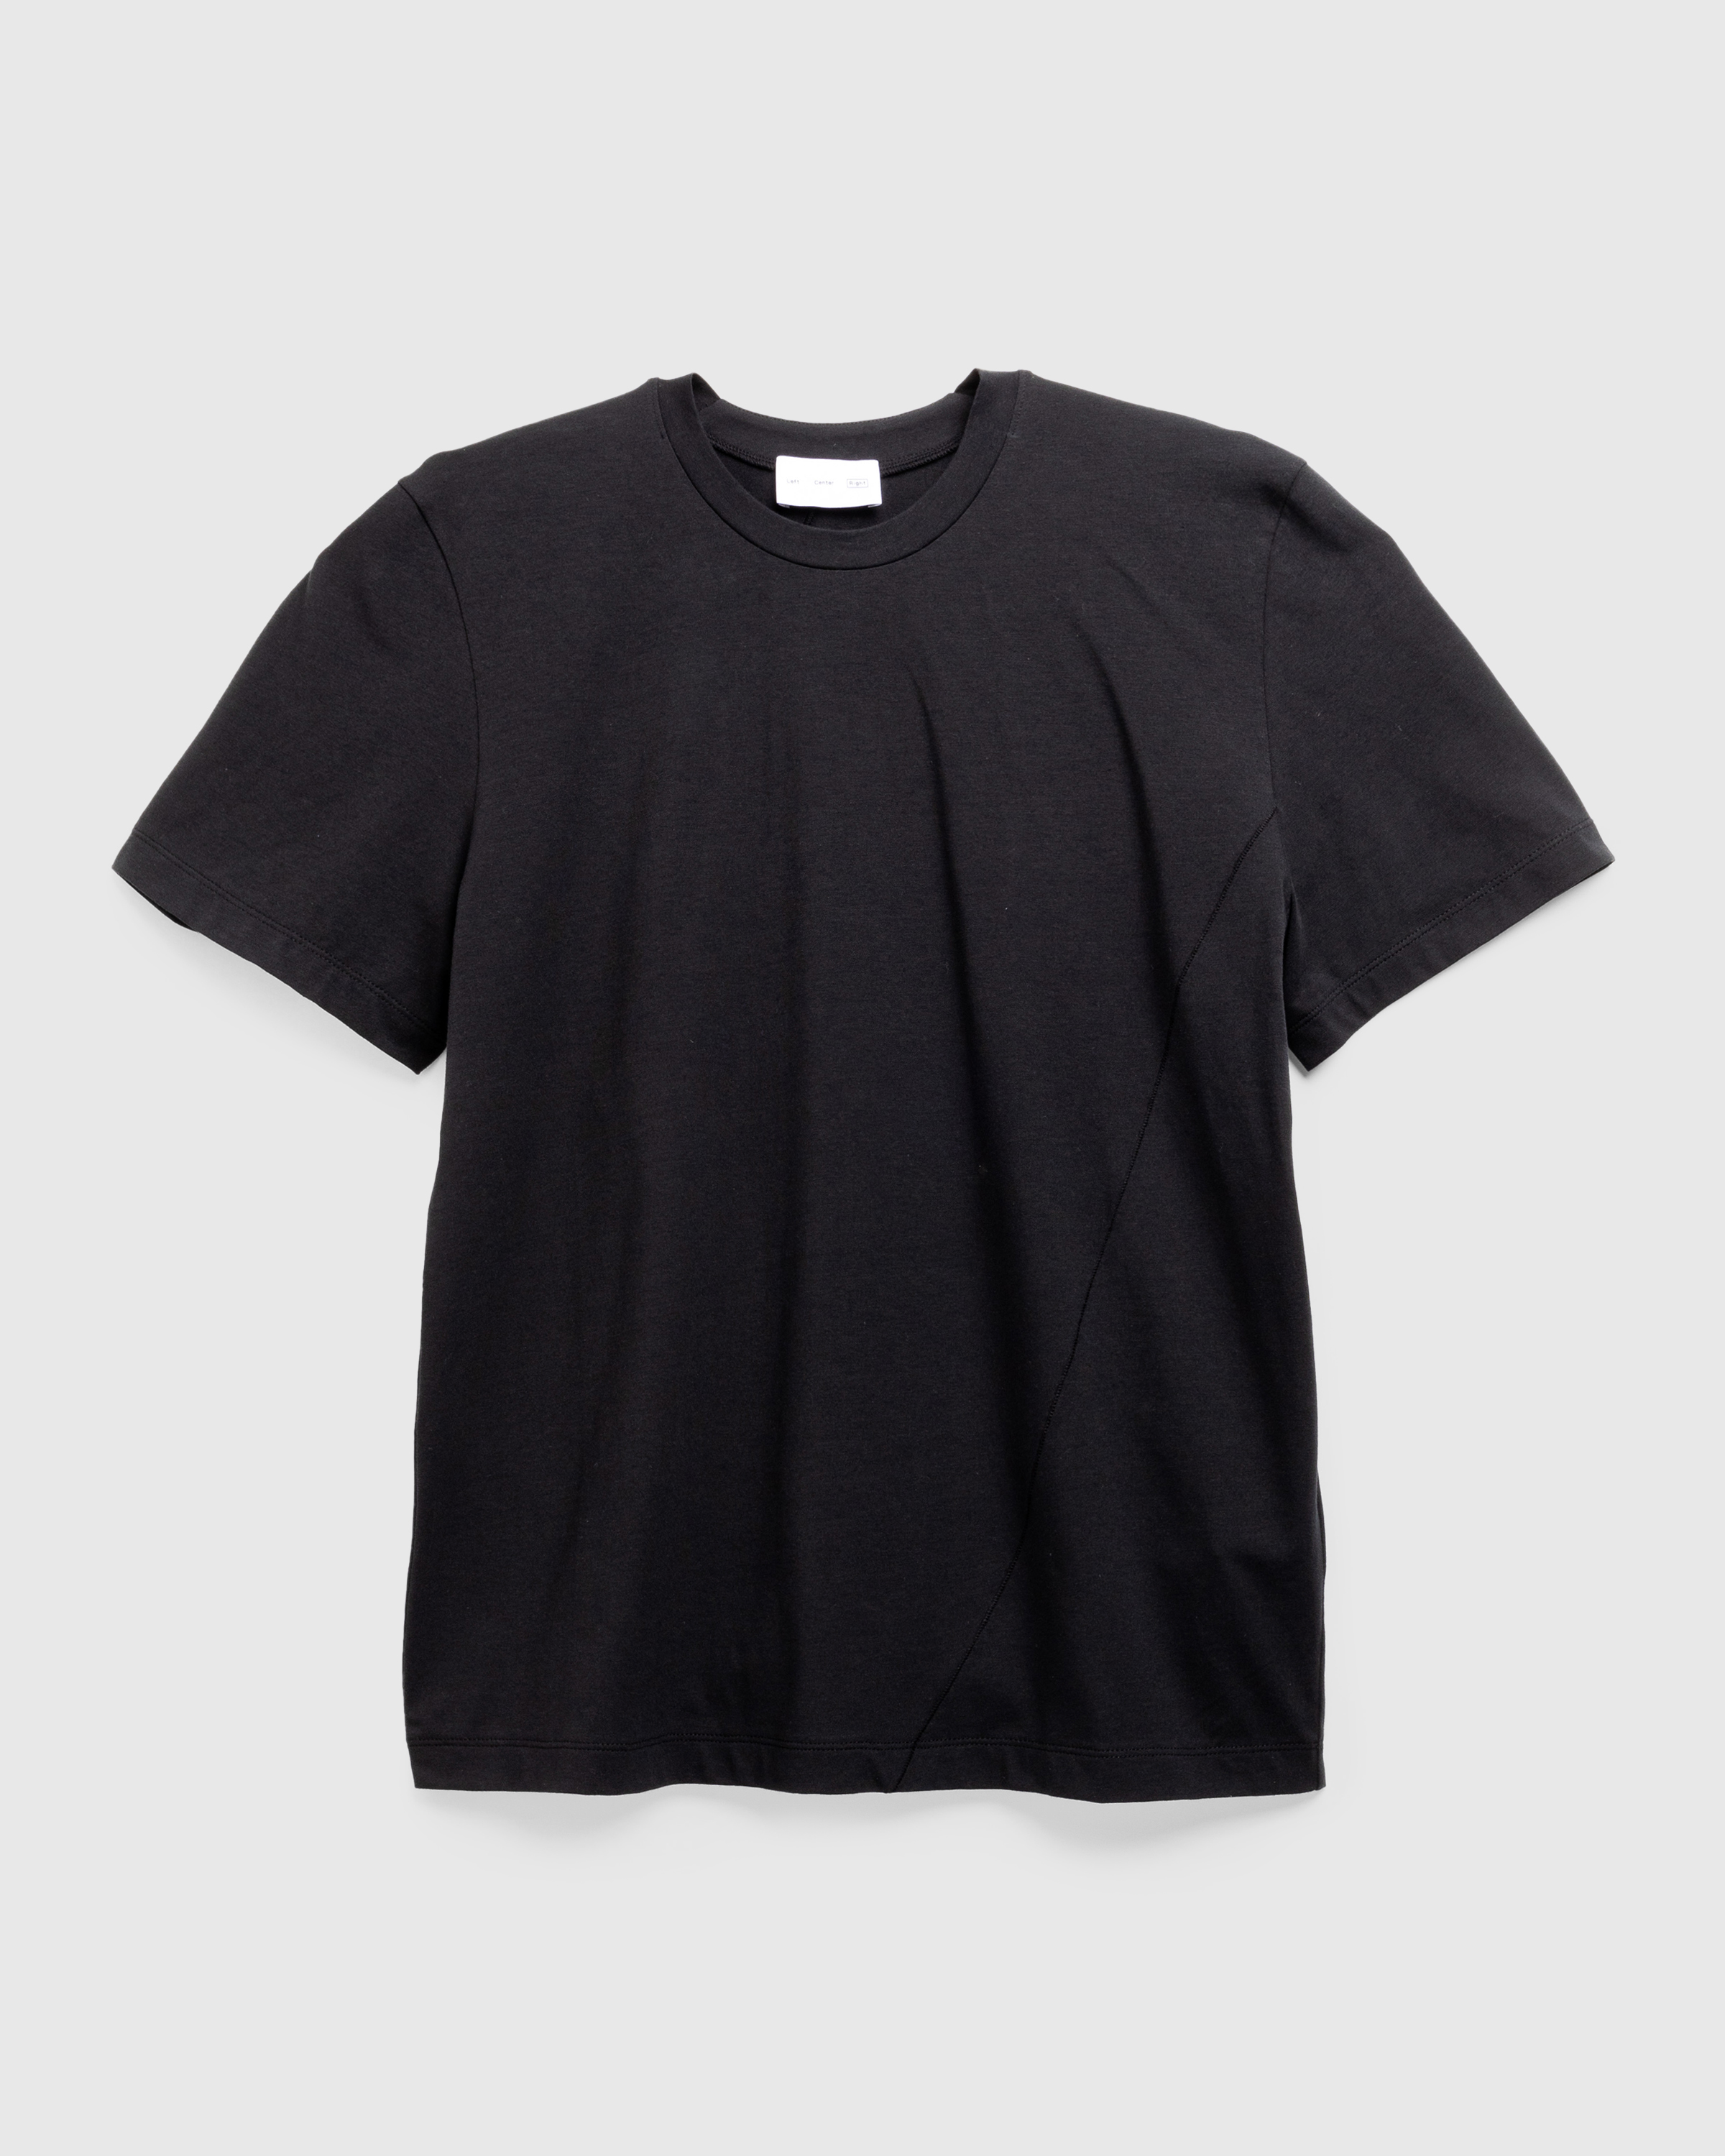 Post Archive Faction (PAF) – 6.0 Tee Right Black - T-Shirts - Black - Image 1